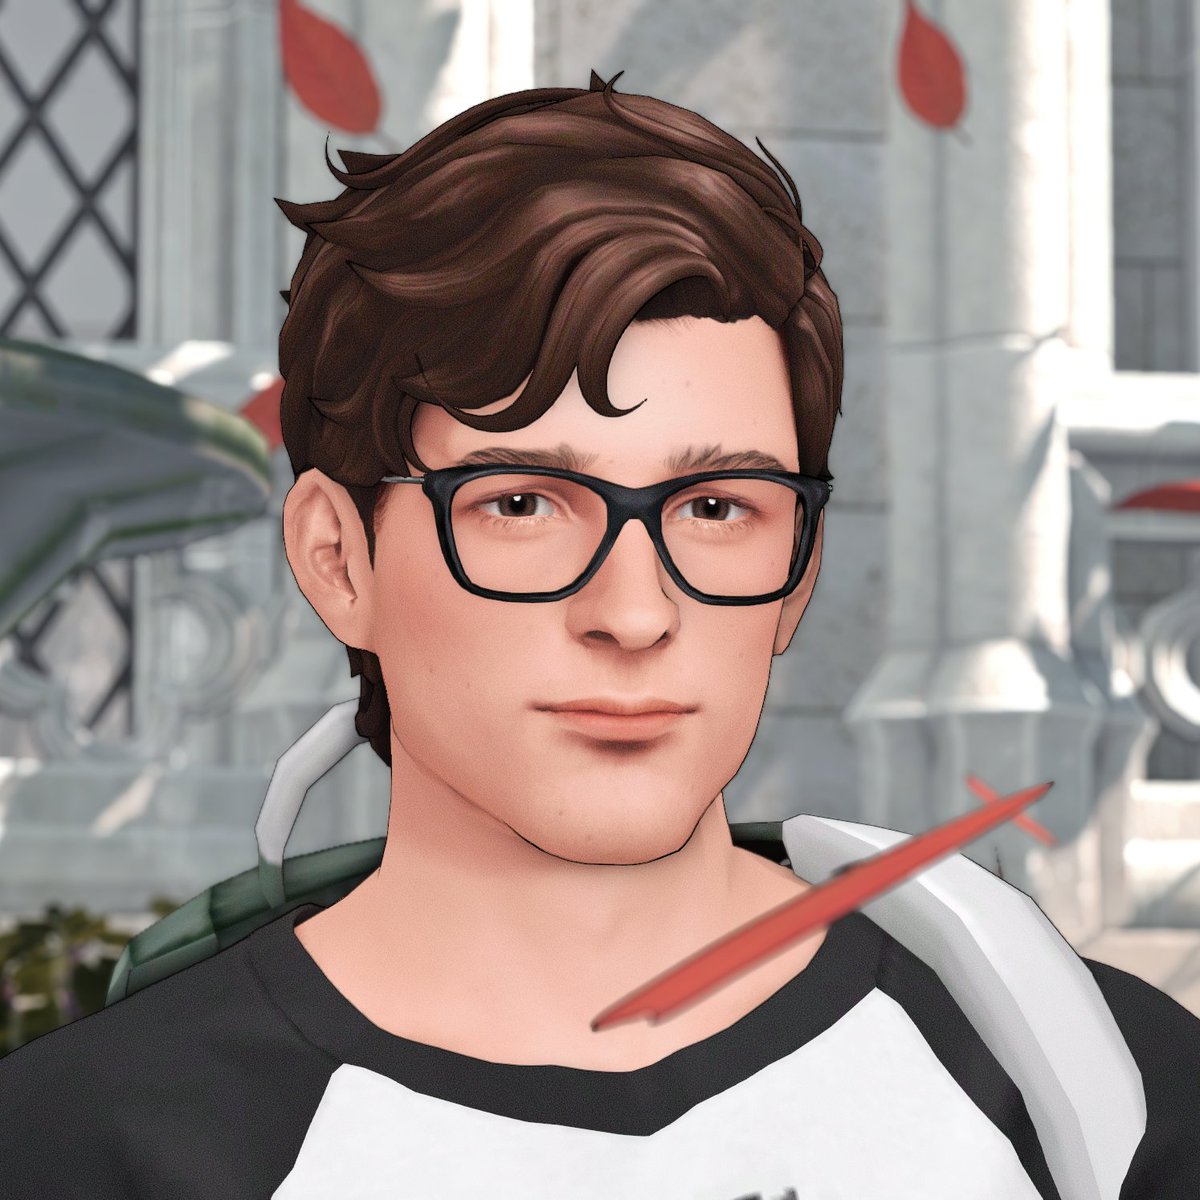 Just a typical nerd, or...?

#TheSims4 #TS4 #ShowUsYourSims